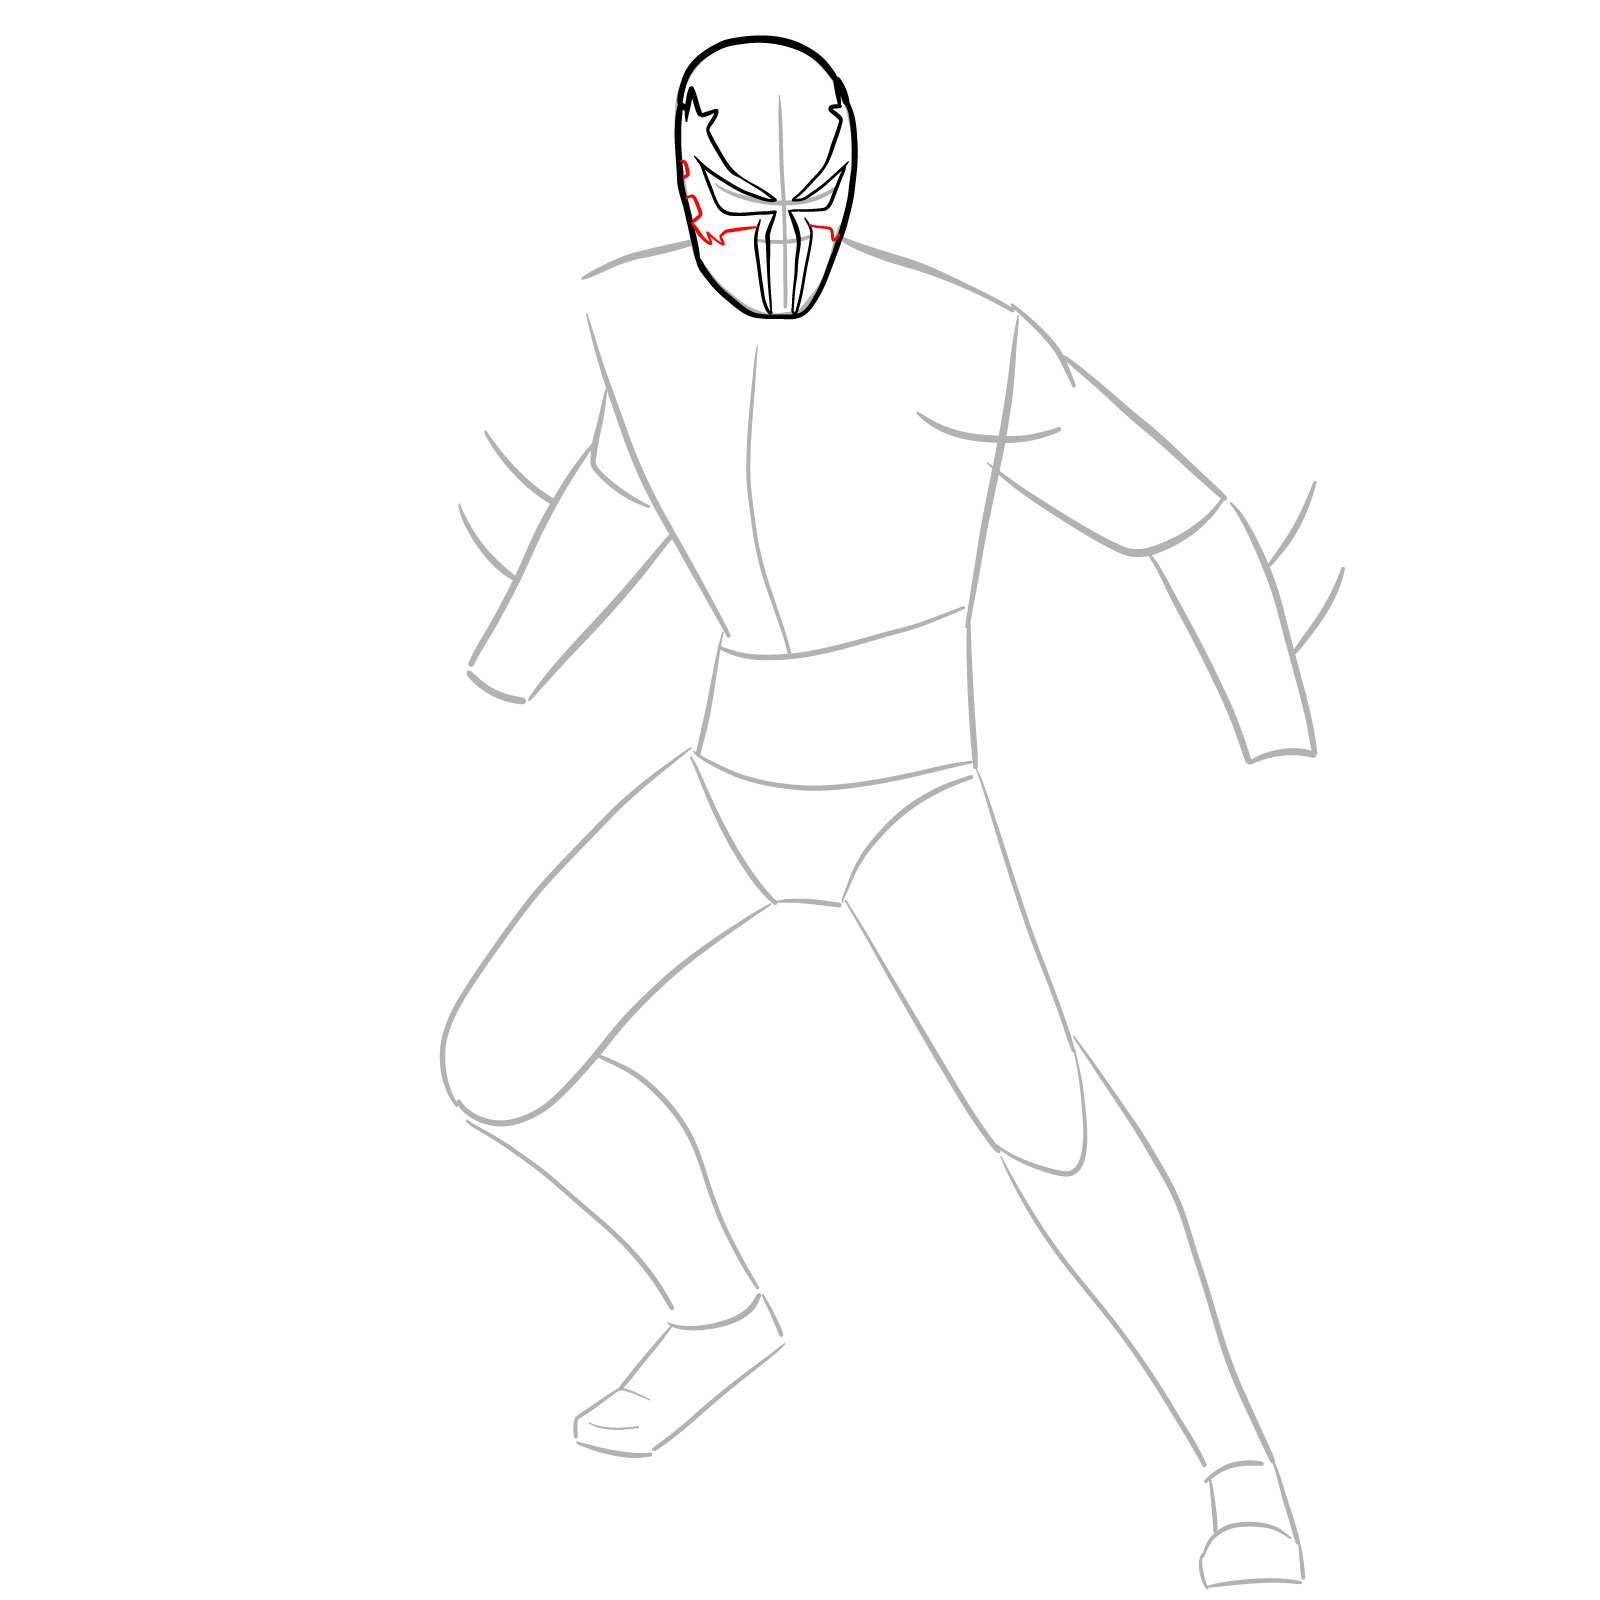 How to draw Spider-Man 2099 - step 09